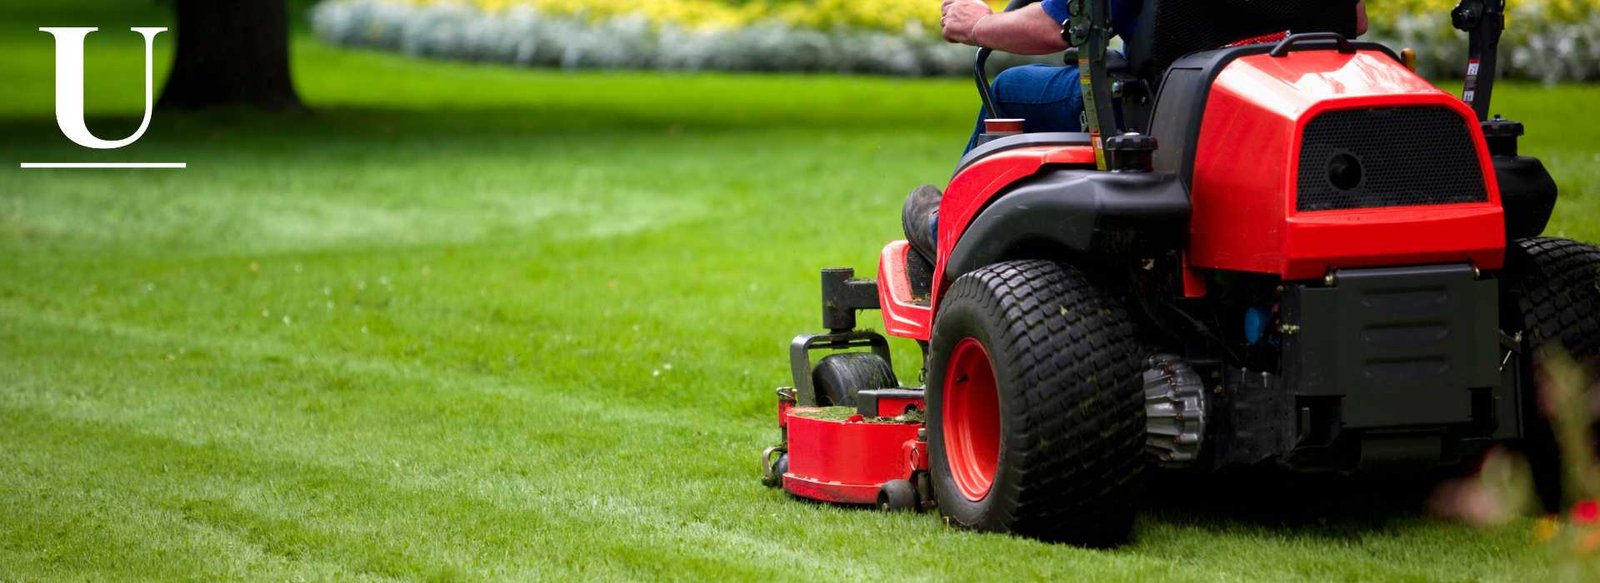 Advanced lawn mowing equipment used by Urban Landscape & Construction for efficient Charlotte lawn mowing service